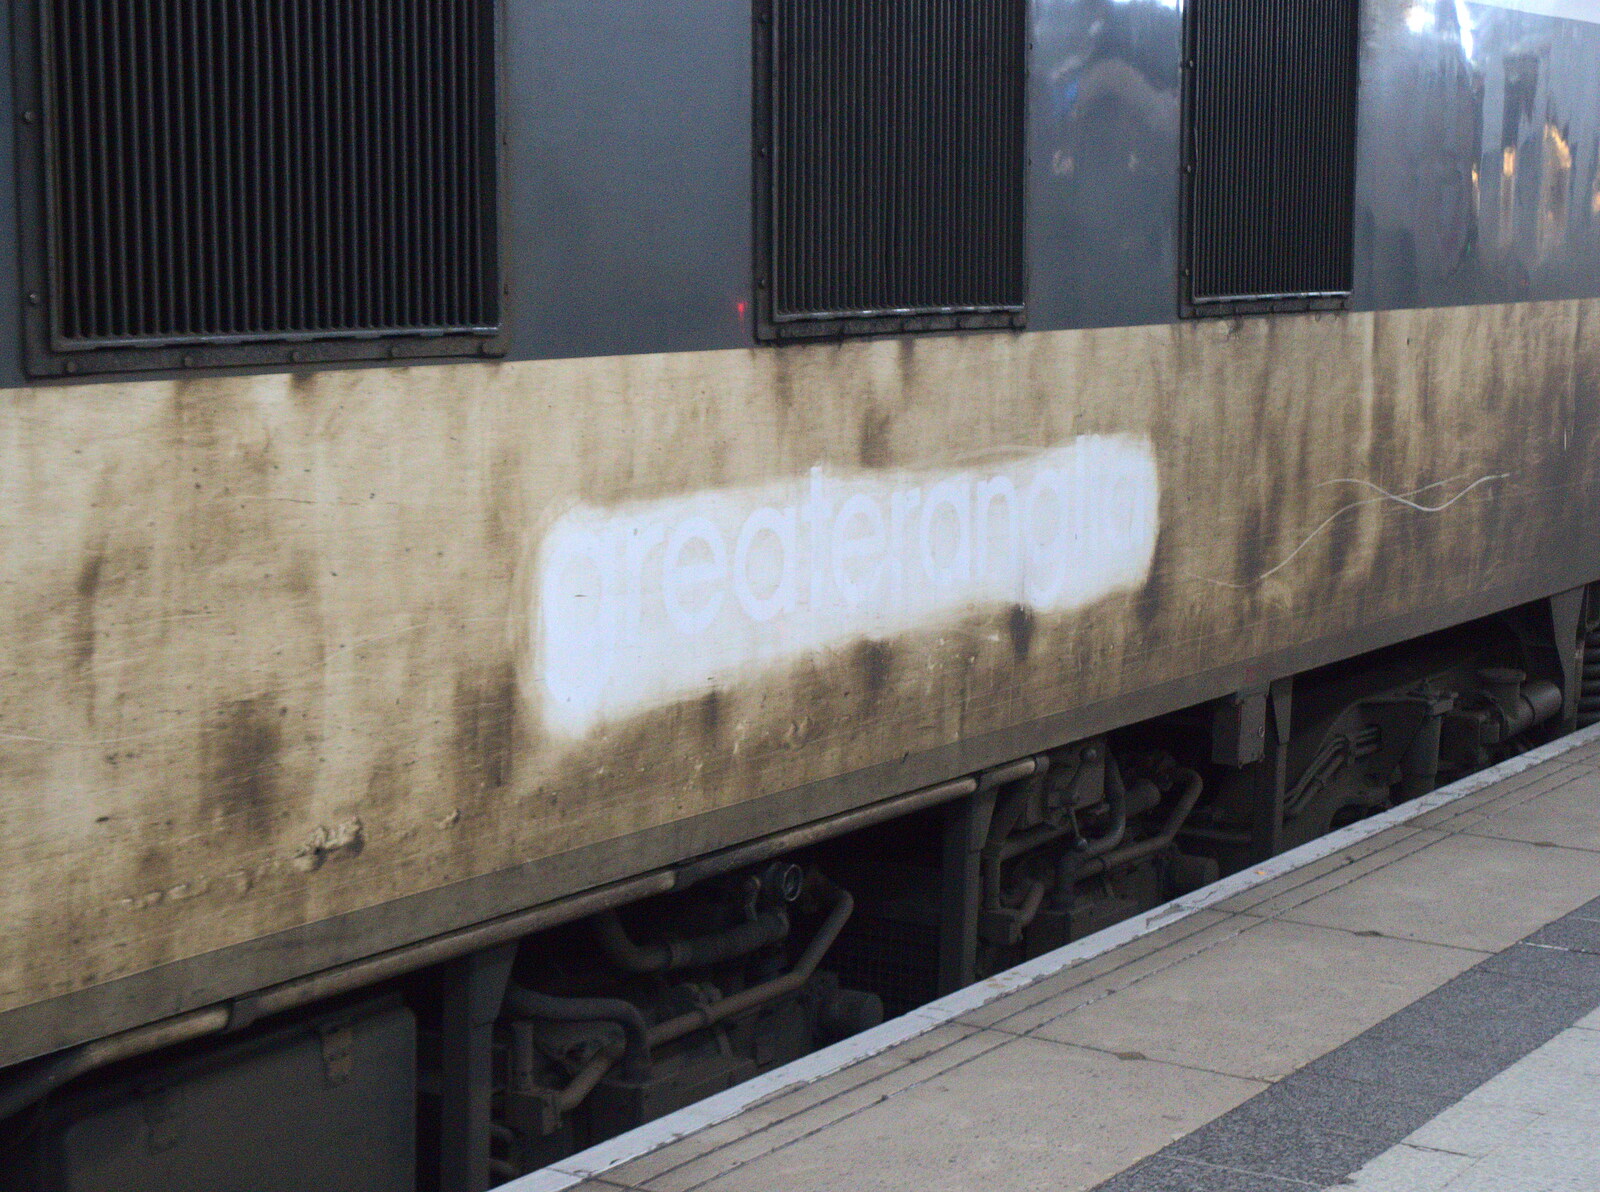 Greater Anglia can only be arsed to clean a bit of the loco from A Small Transport Miscellany, London - 7th January 2020